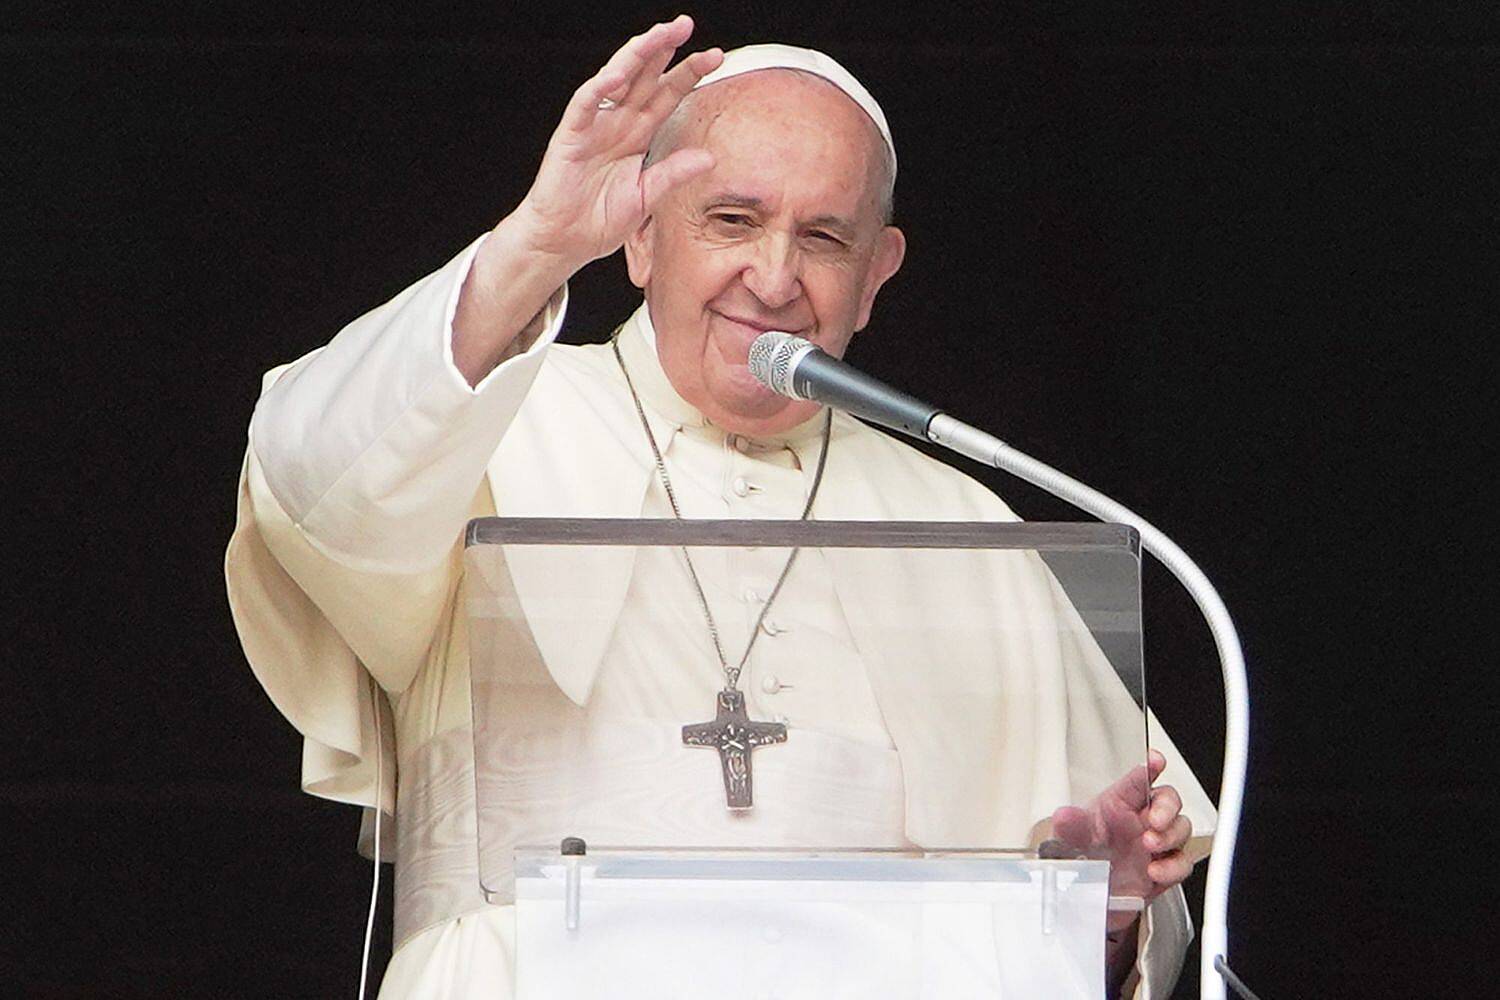 Pope Francis authorizes blessings for same-sex couples